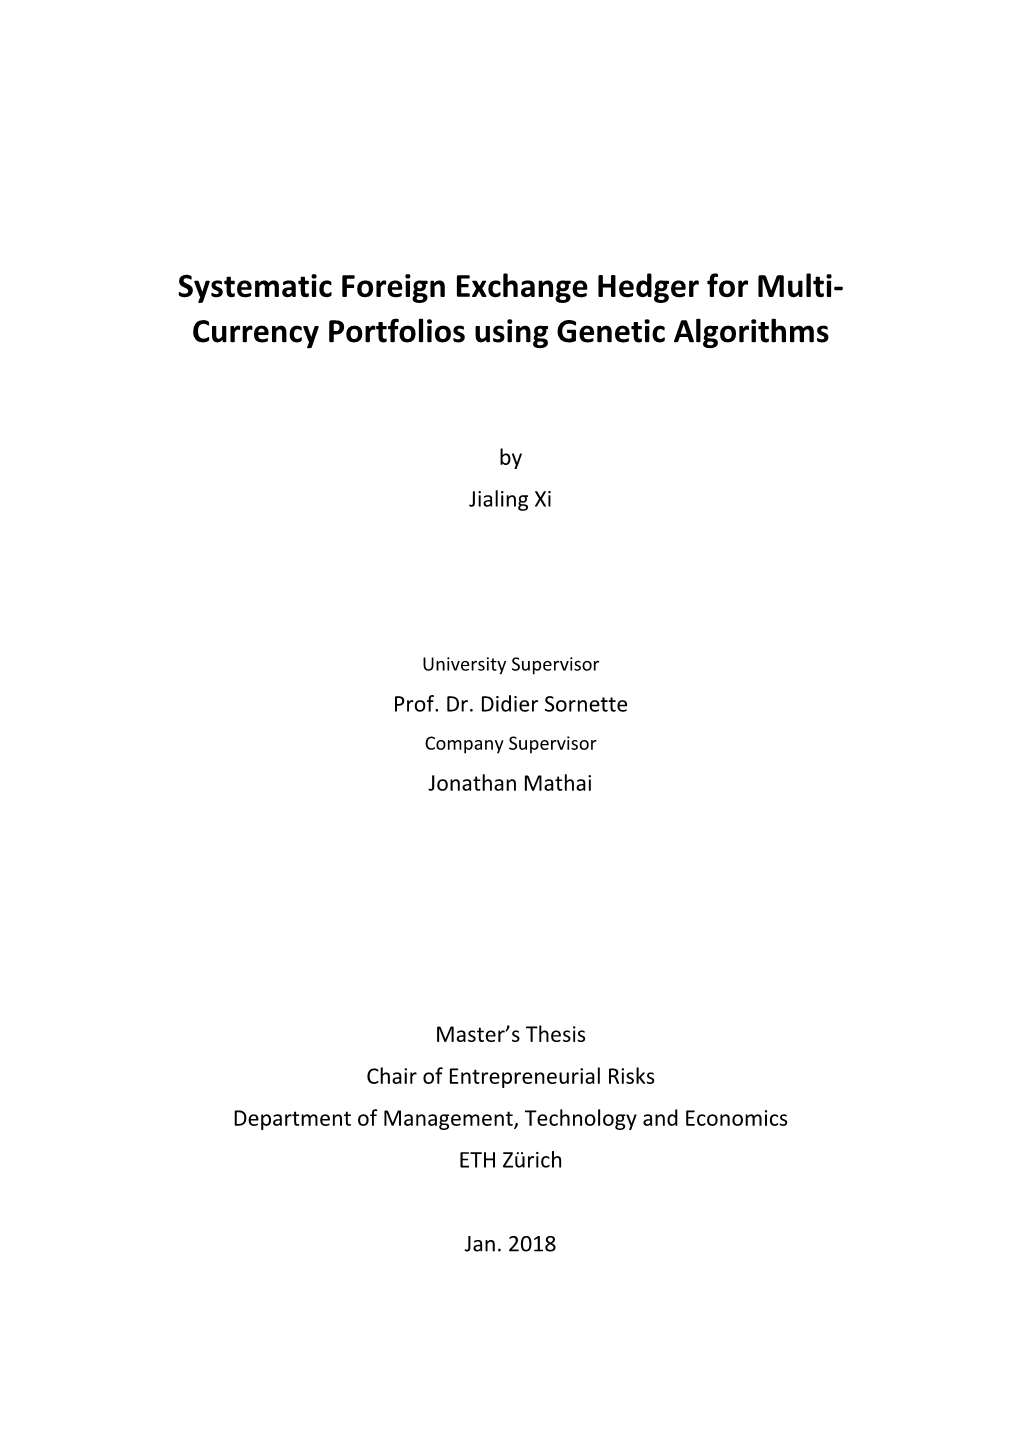 Systematic Foreign Exchange Hedger for Multi- Currency Portfolios Using Genetic Algorithms